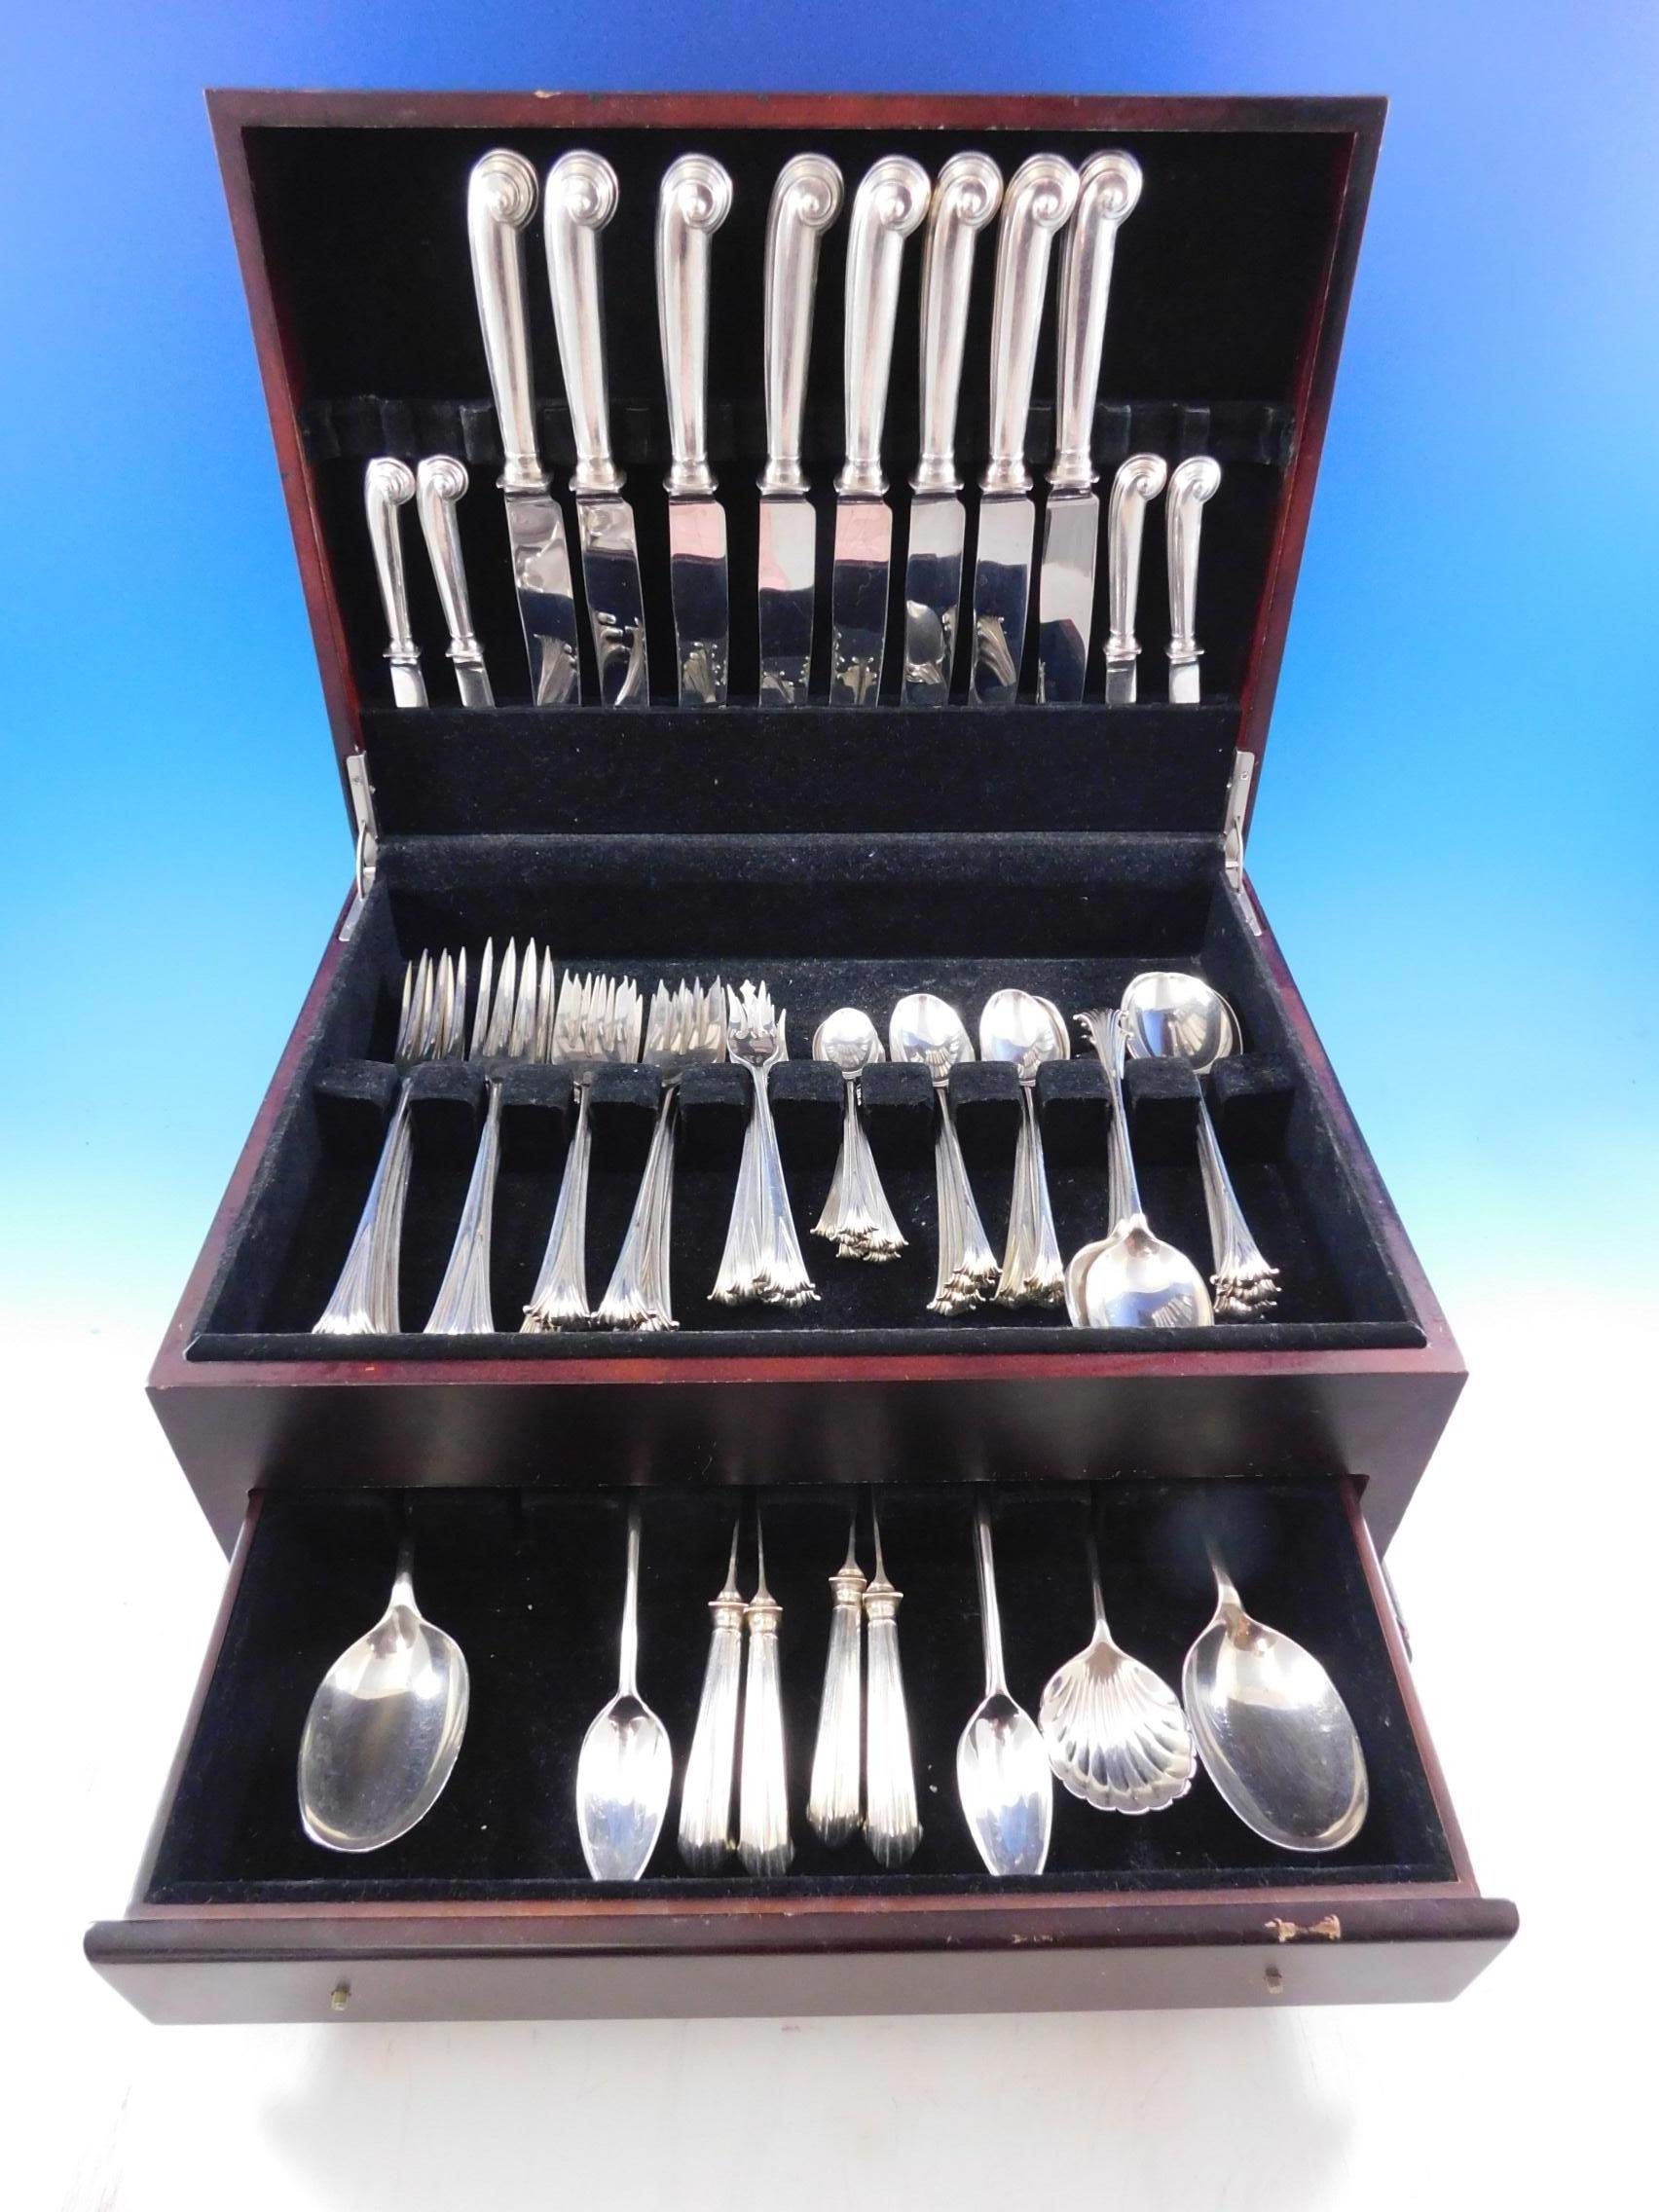 English Onslow by Worcester (England) sterling silver dinner size flatware set - 75 pieces. This set includes:

8 dinner size knives, pistol grip, 9 7/8